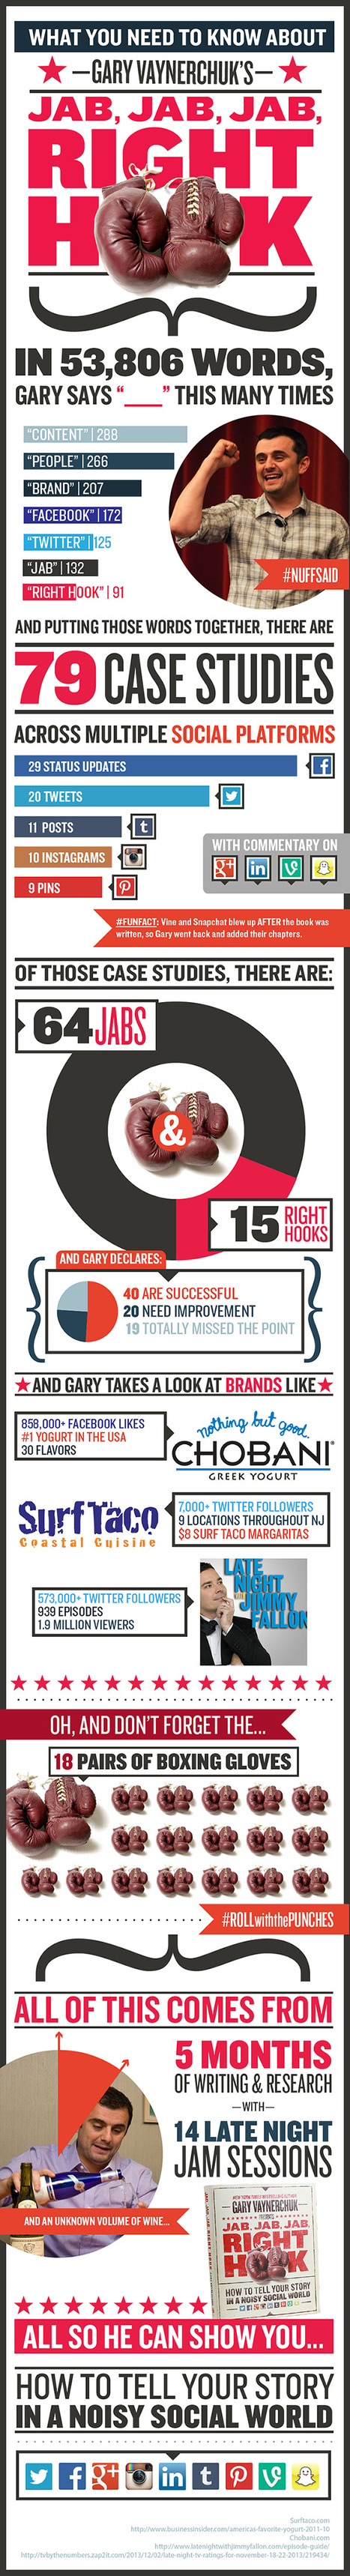 What You Need to Know About Jab, Jab, Jab, Right Hook by Gary Vaynerchuk [Infographic] | digital marketing strategy | Scoop.it